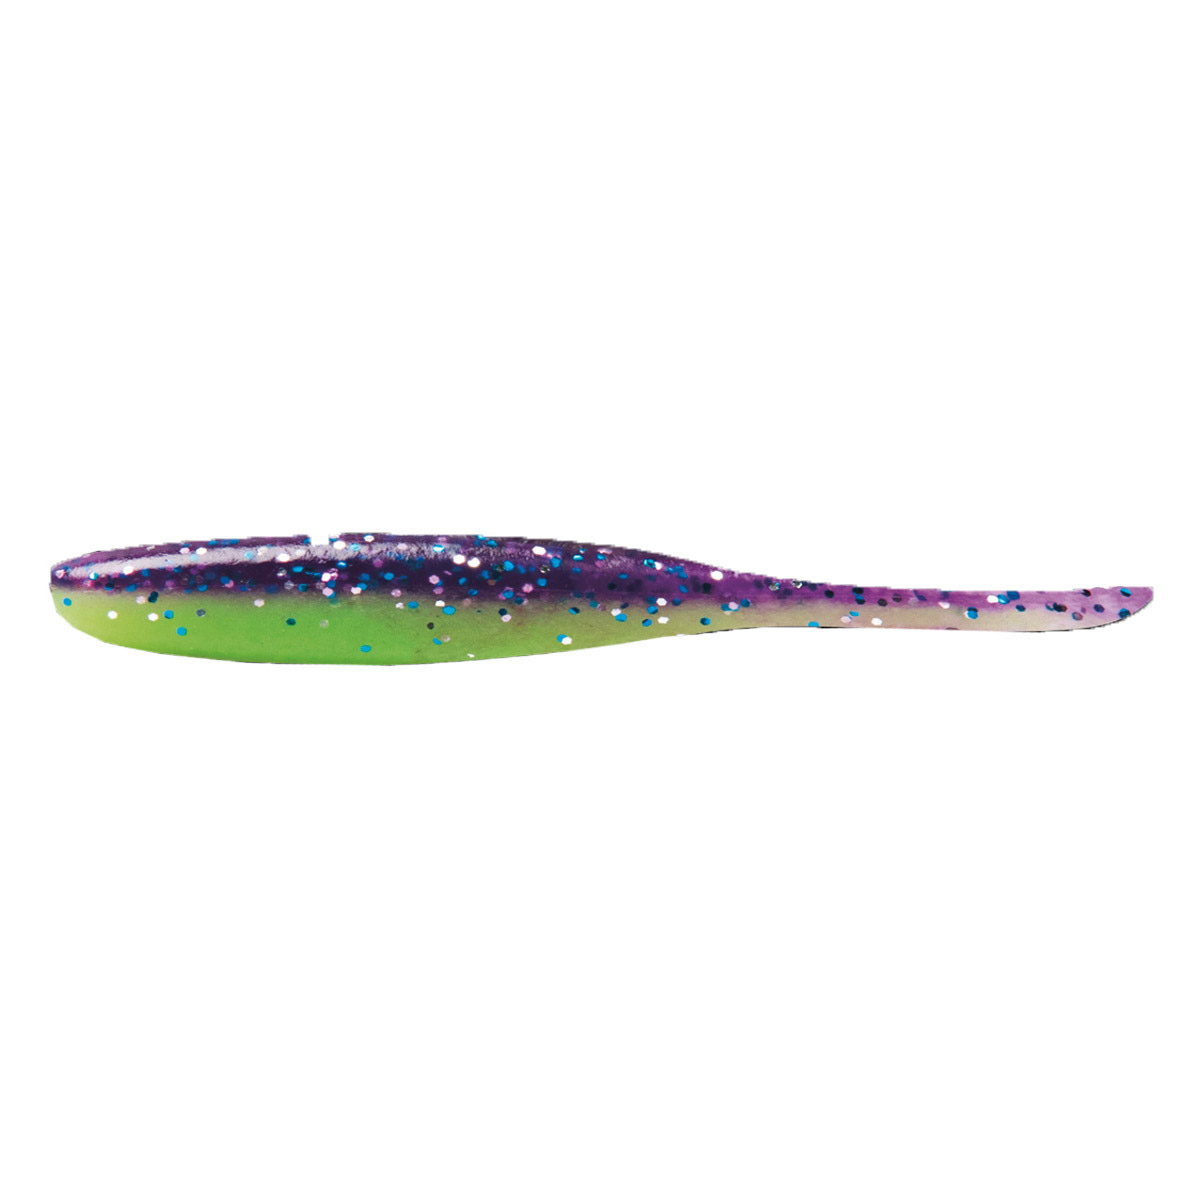 Keitech Shad Impact 4 Inch -  Violet Silver Chartreuse